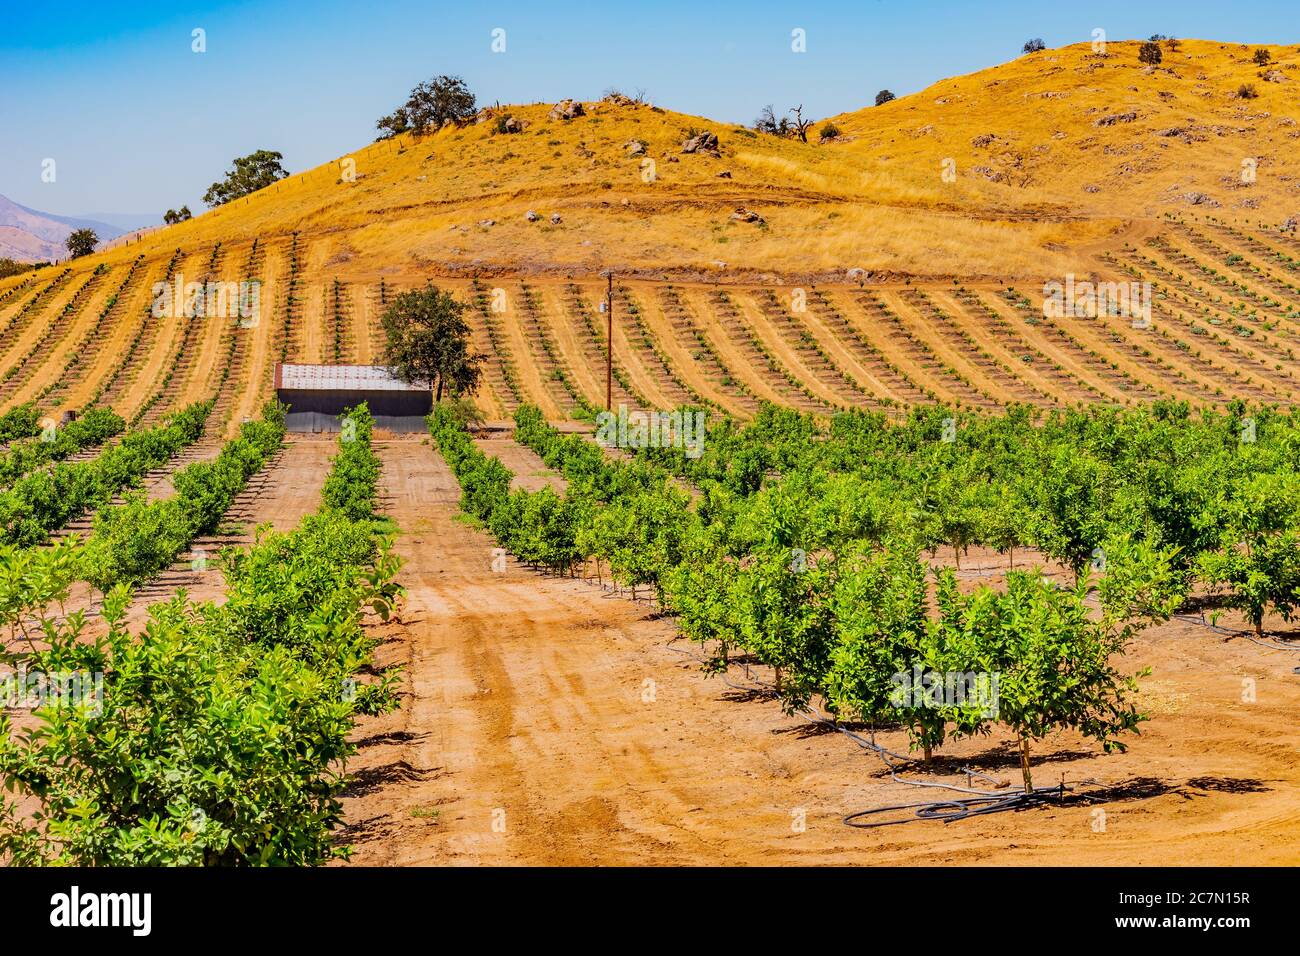 Young and younger orange trees grow in a expanding orchard in the San Joaquin Valley. This agricultural valley is the heart of  California's industry. Stock Photo